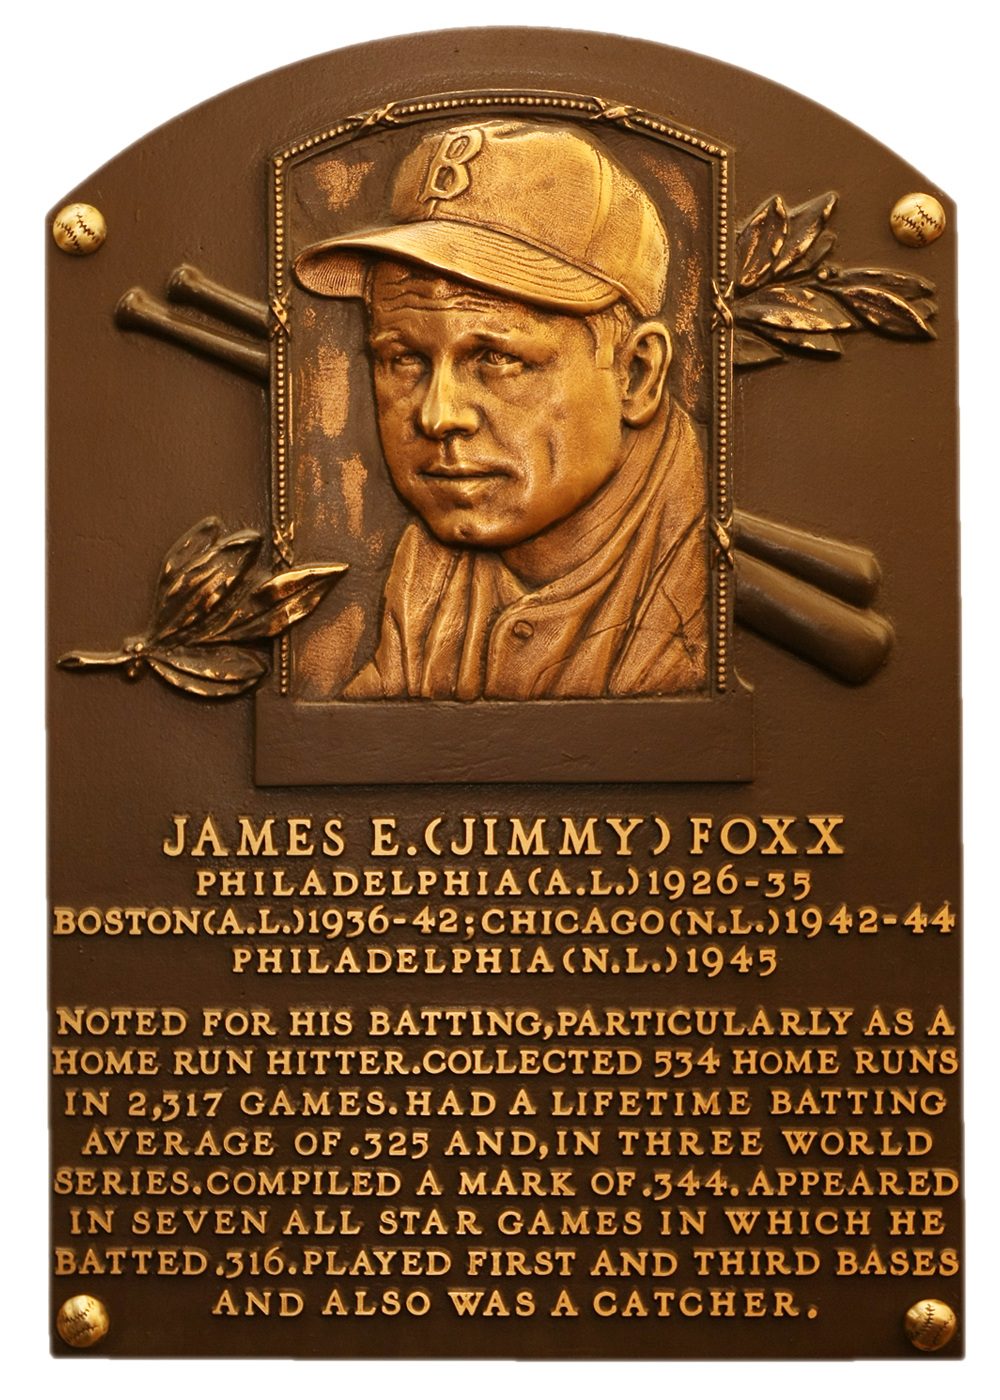 Jimmie Foxx Hall of Fame plaque